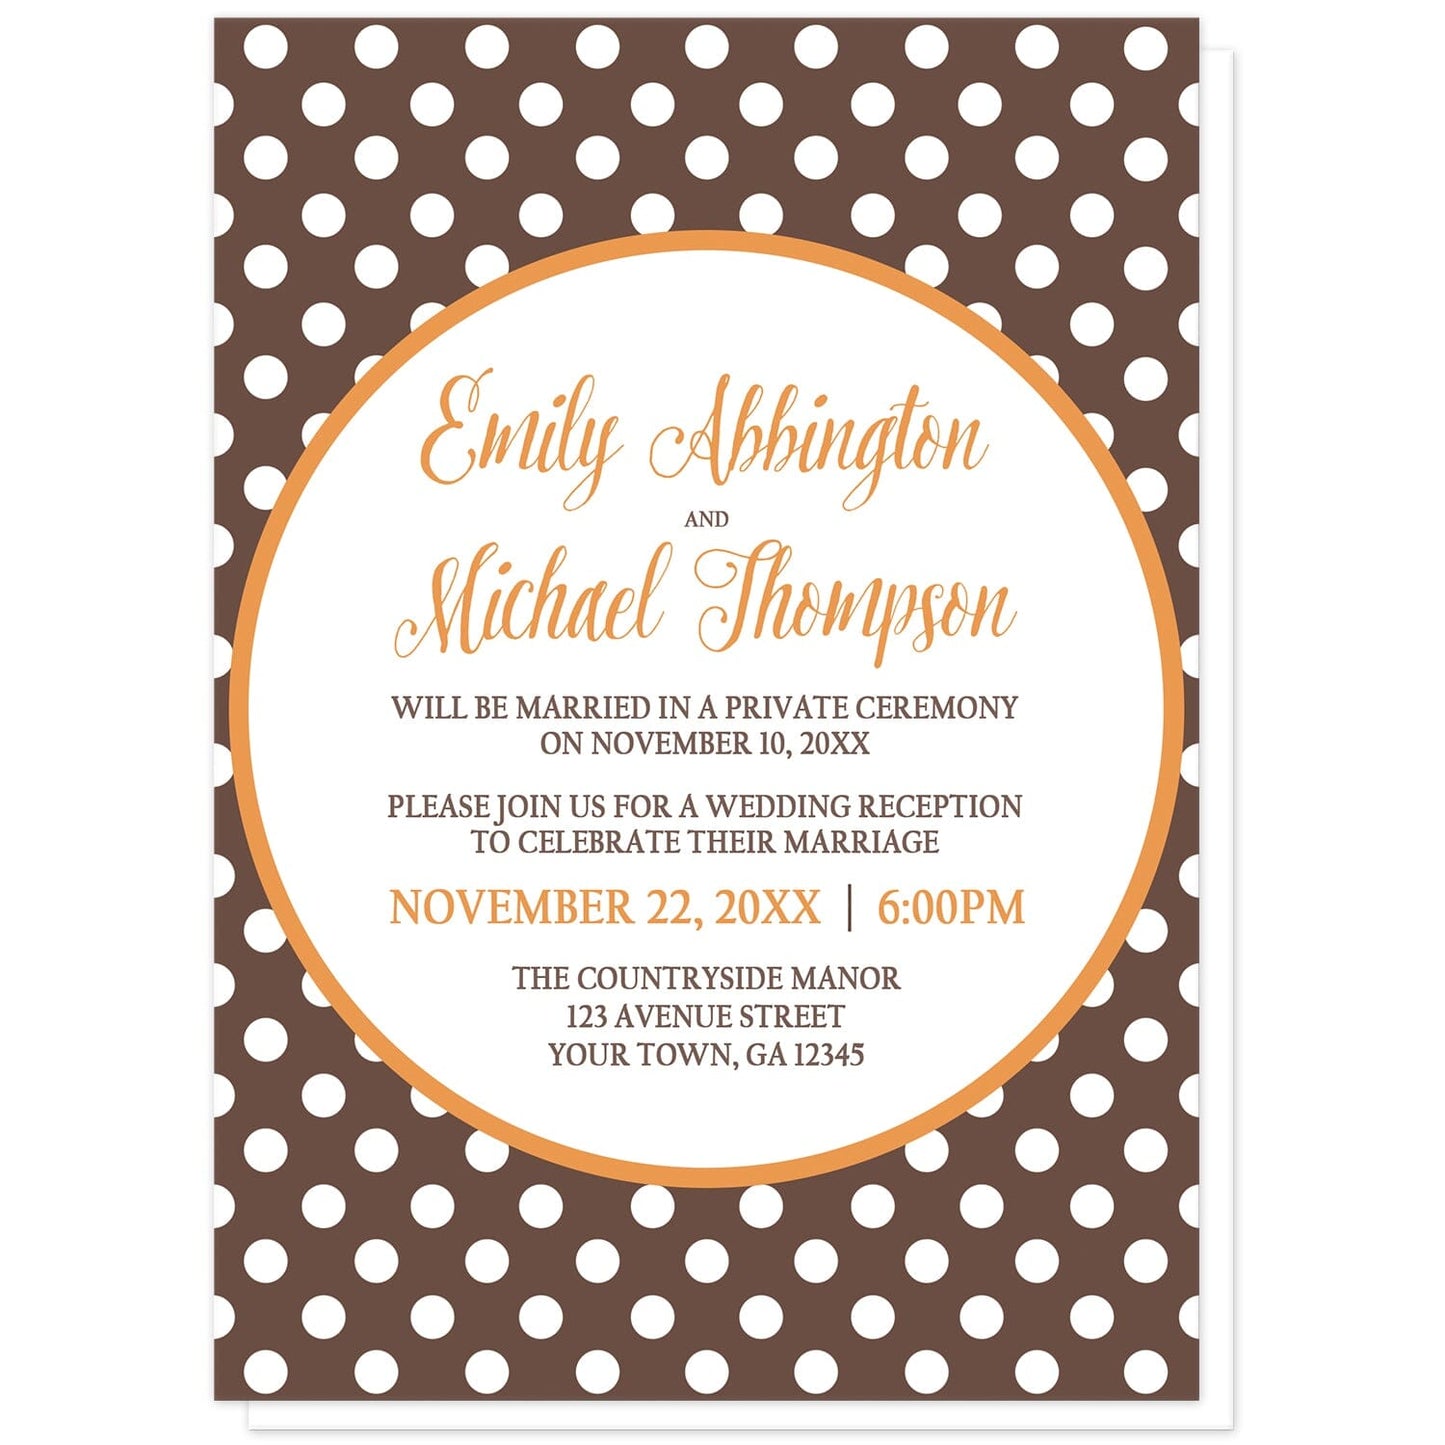 Orange Brown Polka Dot Reception Only Invitations at Artistically Invited. Autumn-inspired orange brown polka dot reception only invitations with your post-wedding reception details custom printed in orange and brown inside a white circle outlined in orange, over a brown polka dot pattern. The couple's names and reception date are printed in orange while the remaining details are printed in brown.